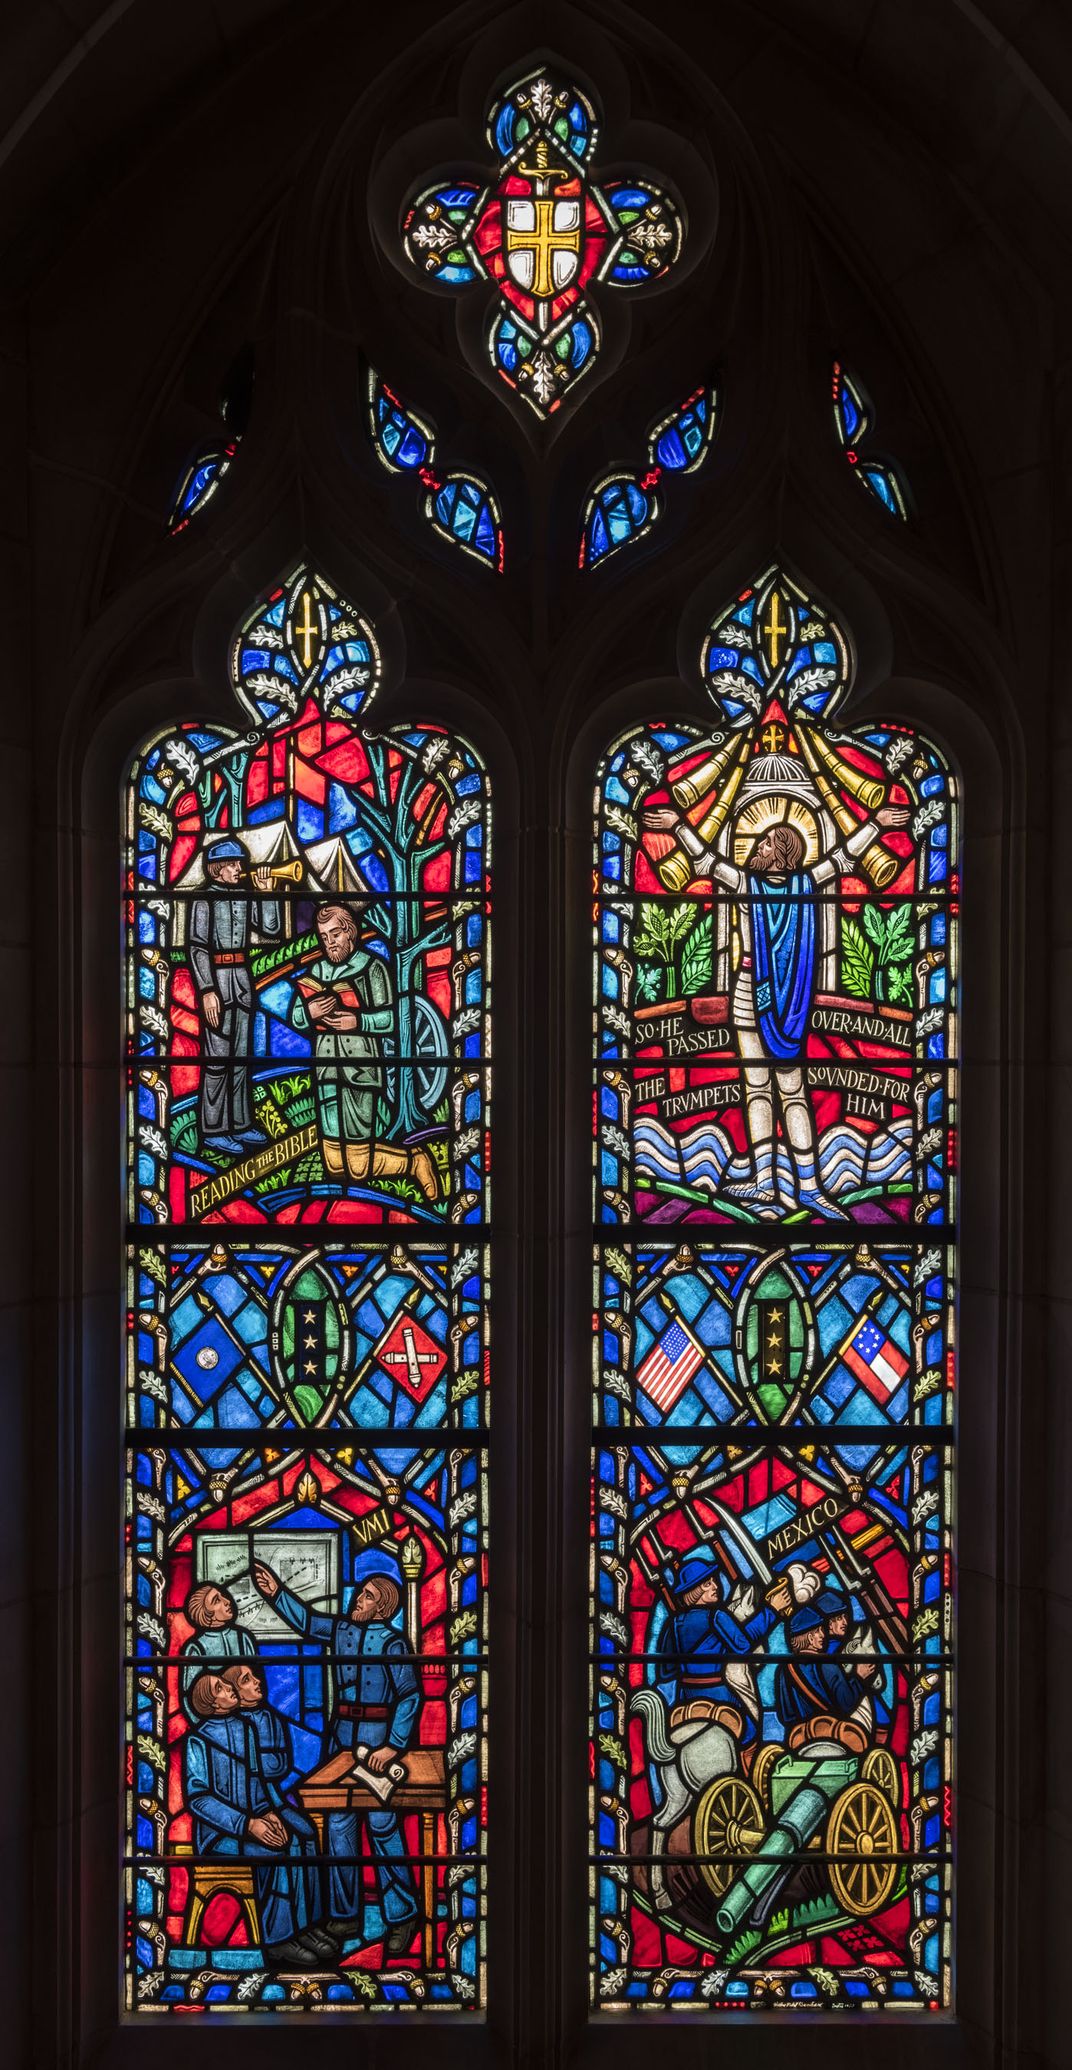 Stained glass window honoring Confederate general Thomas "Stonewall" Jackson